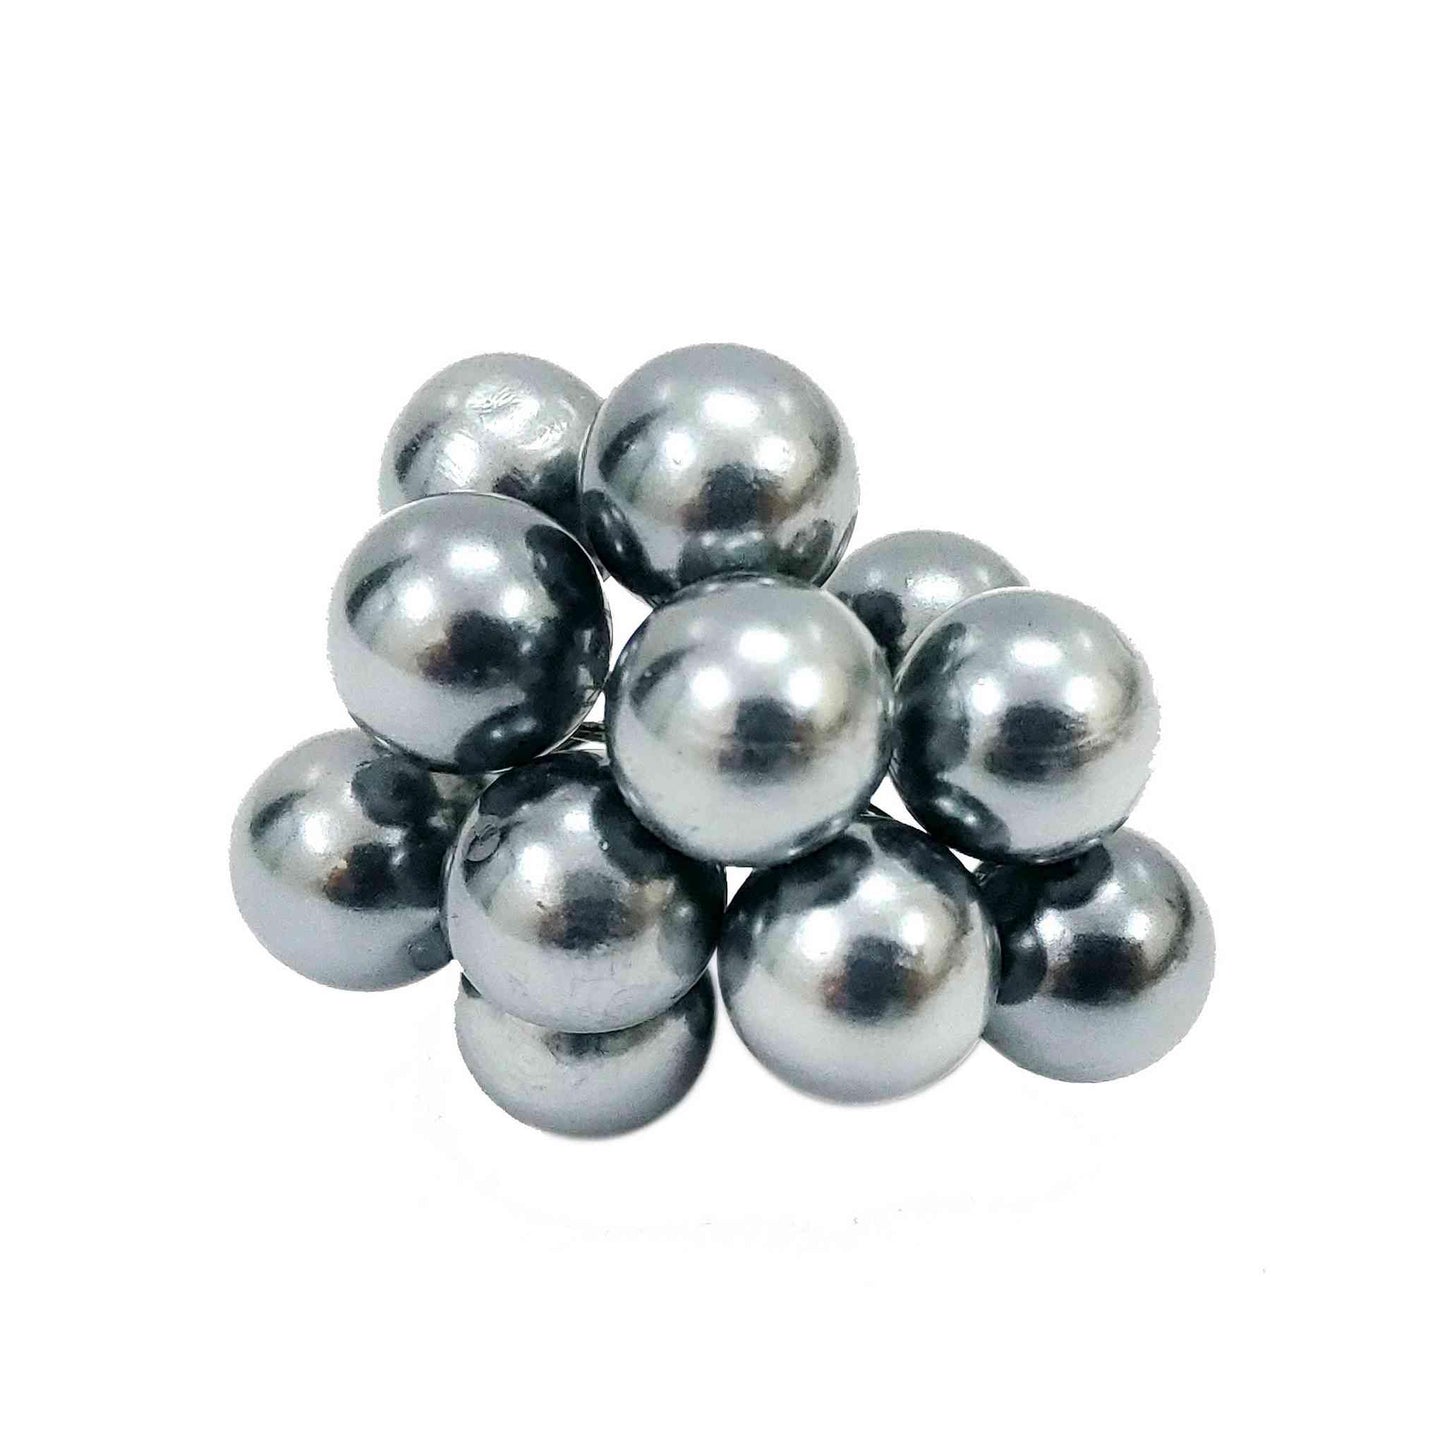 Mettalic finish Pearl Stick for DIY Craft, Trouseau Packing or Decoration (Bunch of 12) - Design 116, Dark Gray - Indian Petals